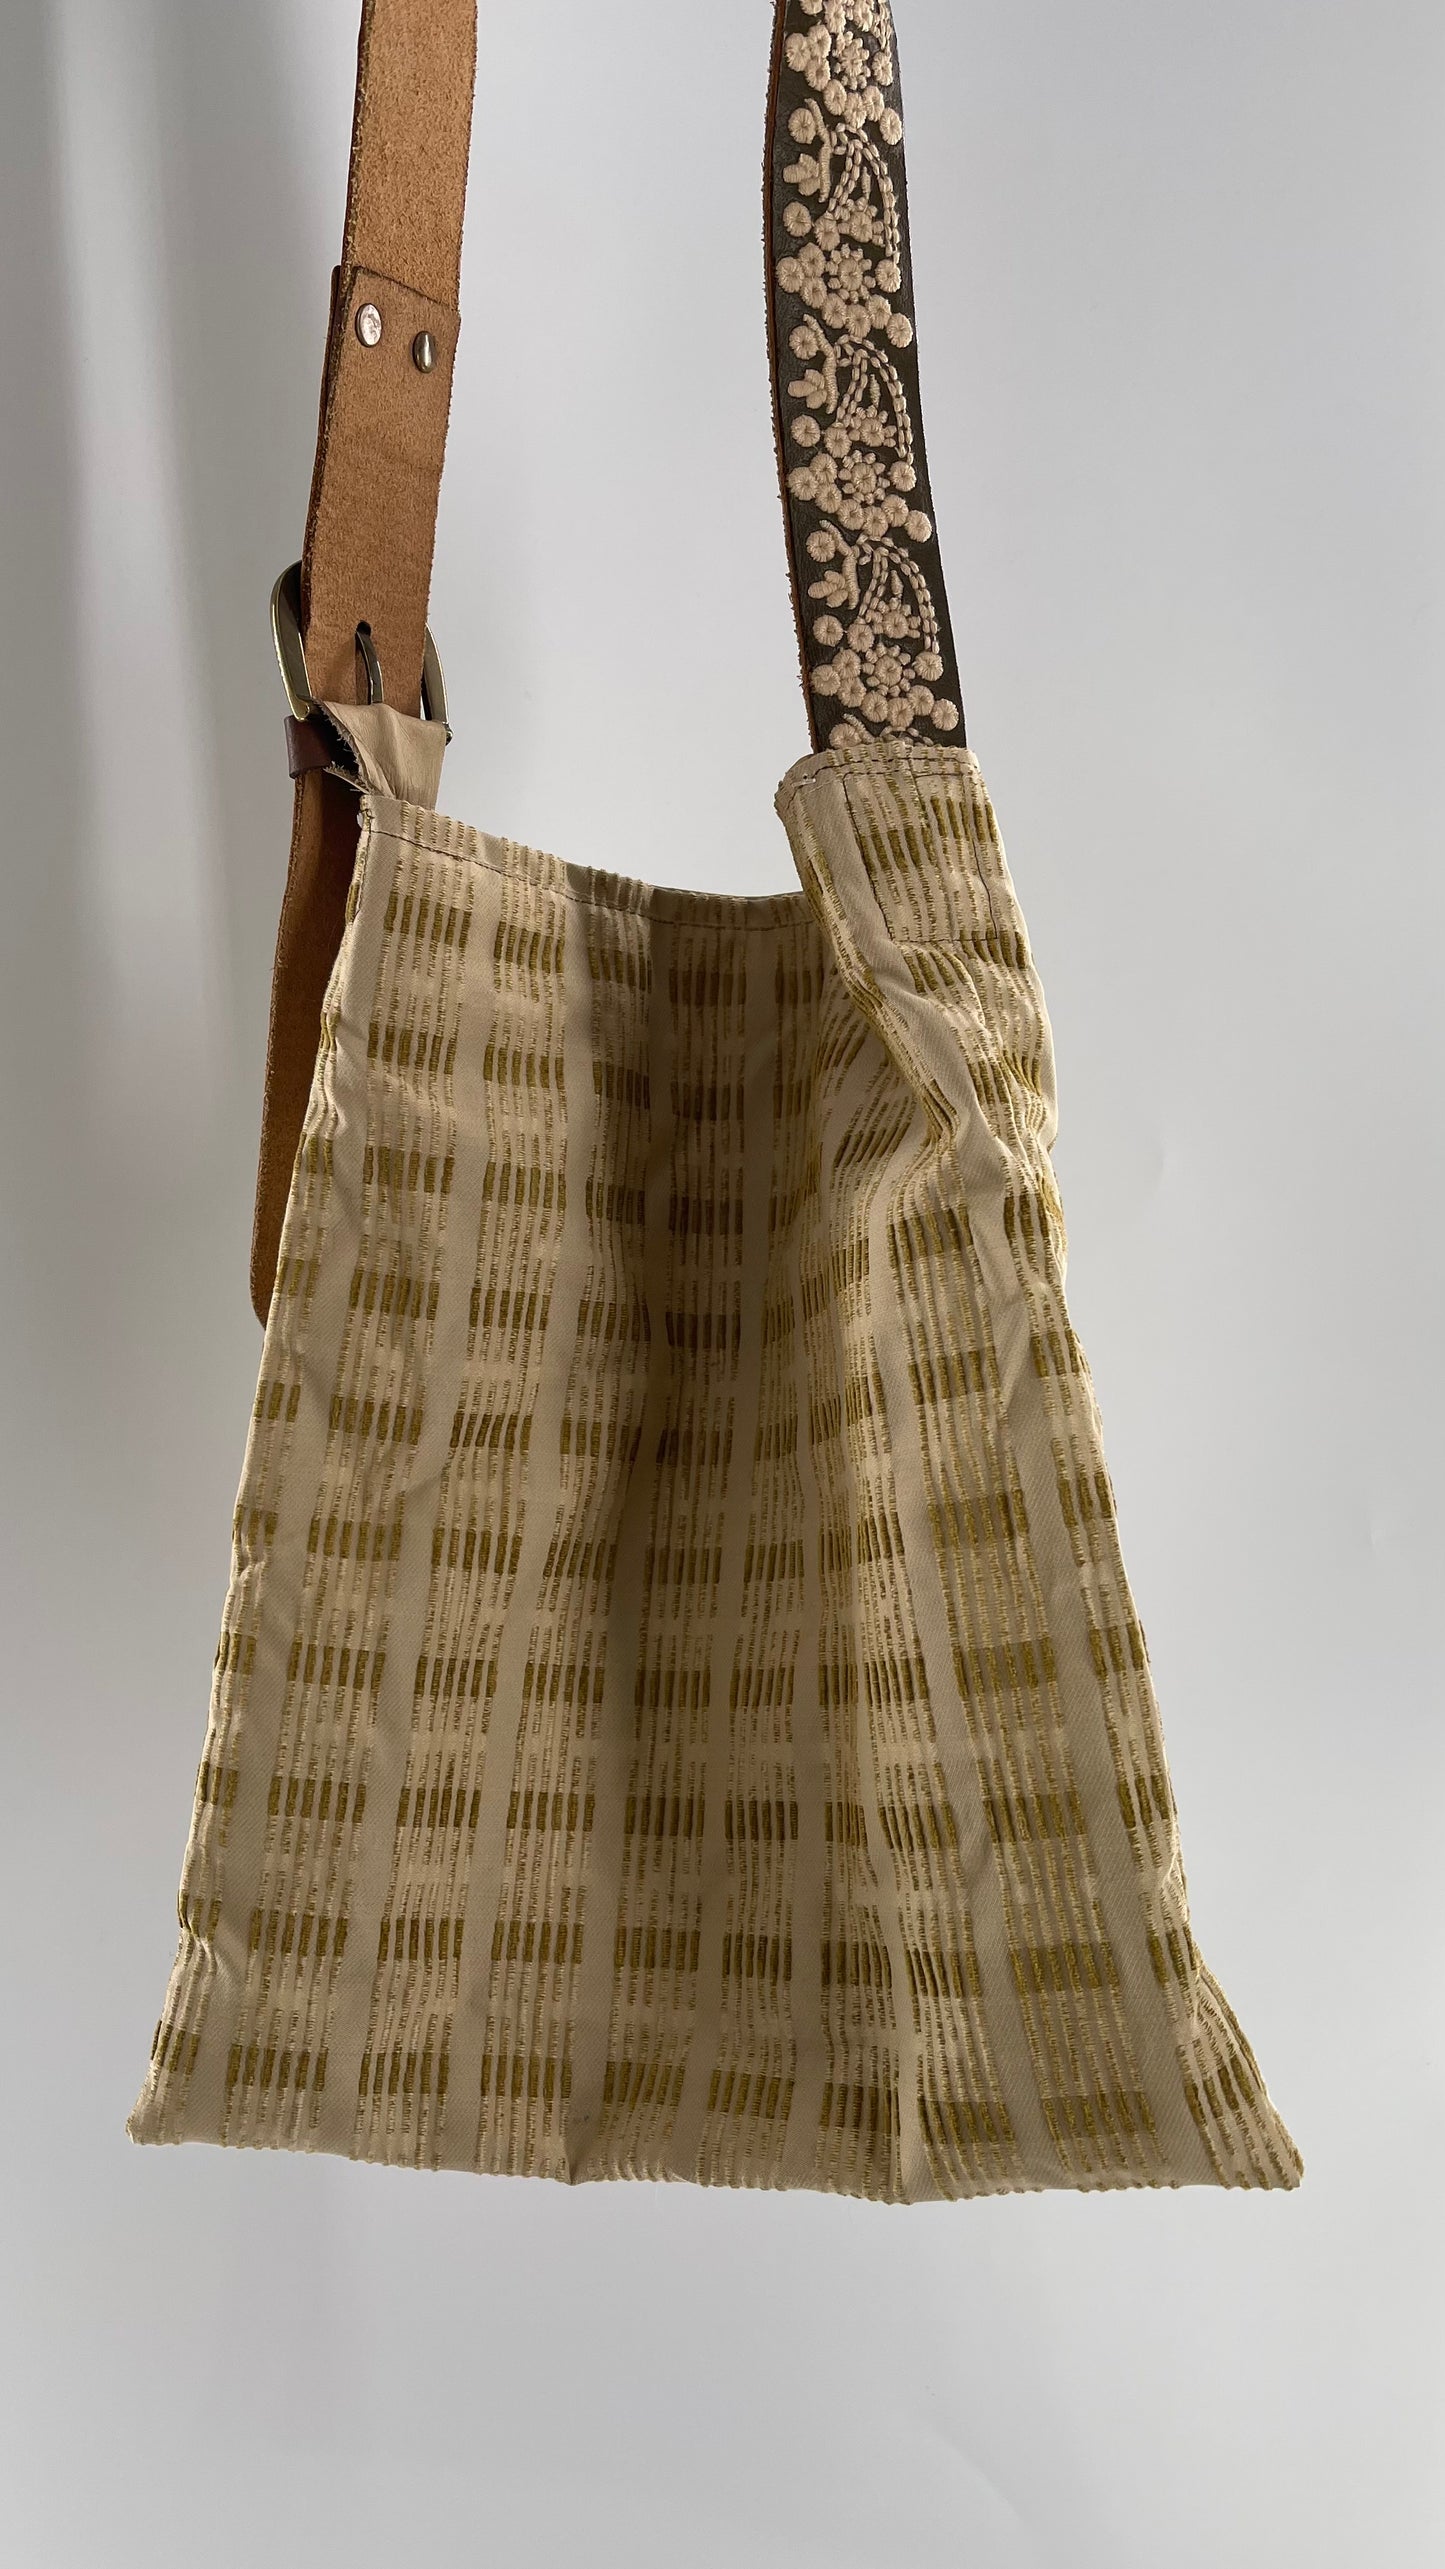 Tote with Embroidered Gold Exterior, Embroidered Leather Strap and Leather Interior - Shown Reversed